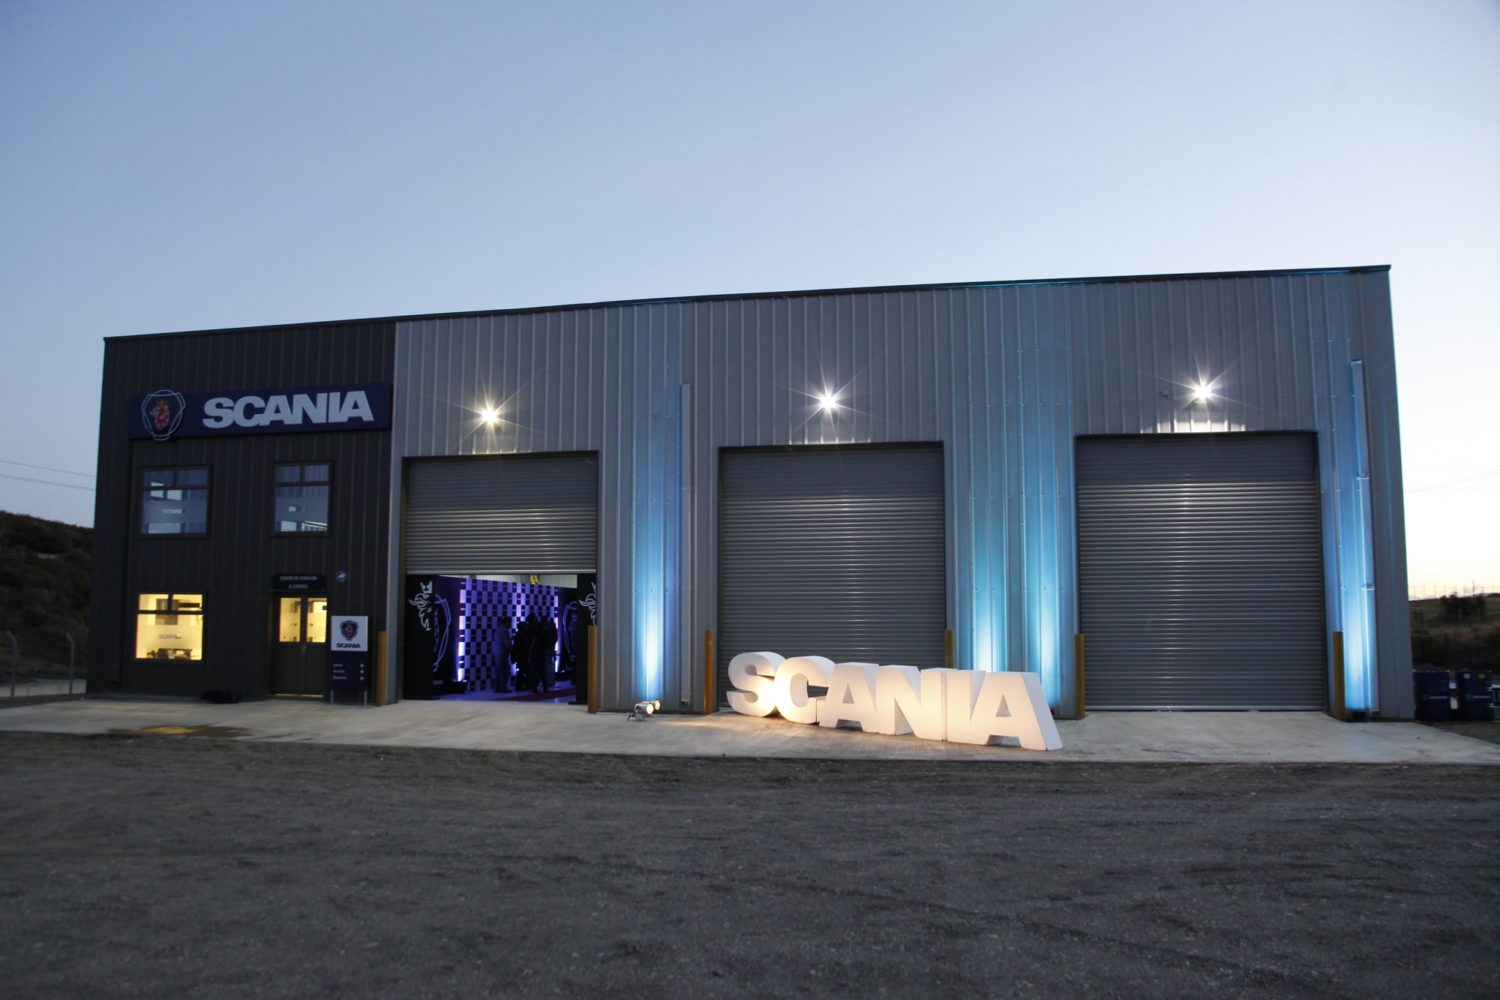 Prefab Steel Building Automotive Workshop. 85x87 Scania Warehouse located in Punta Arenas, Chile.